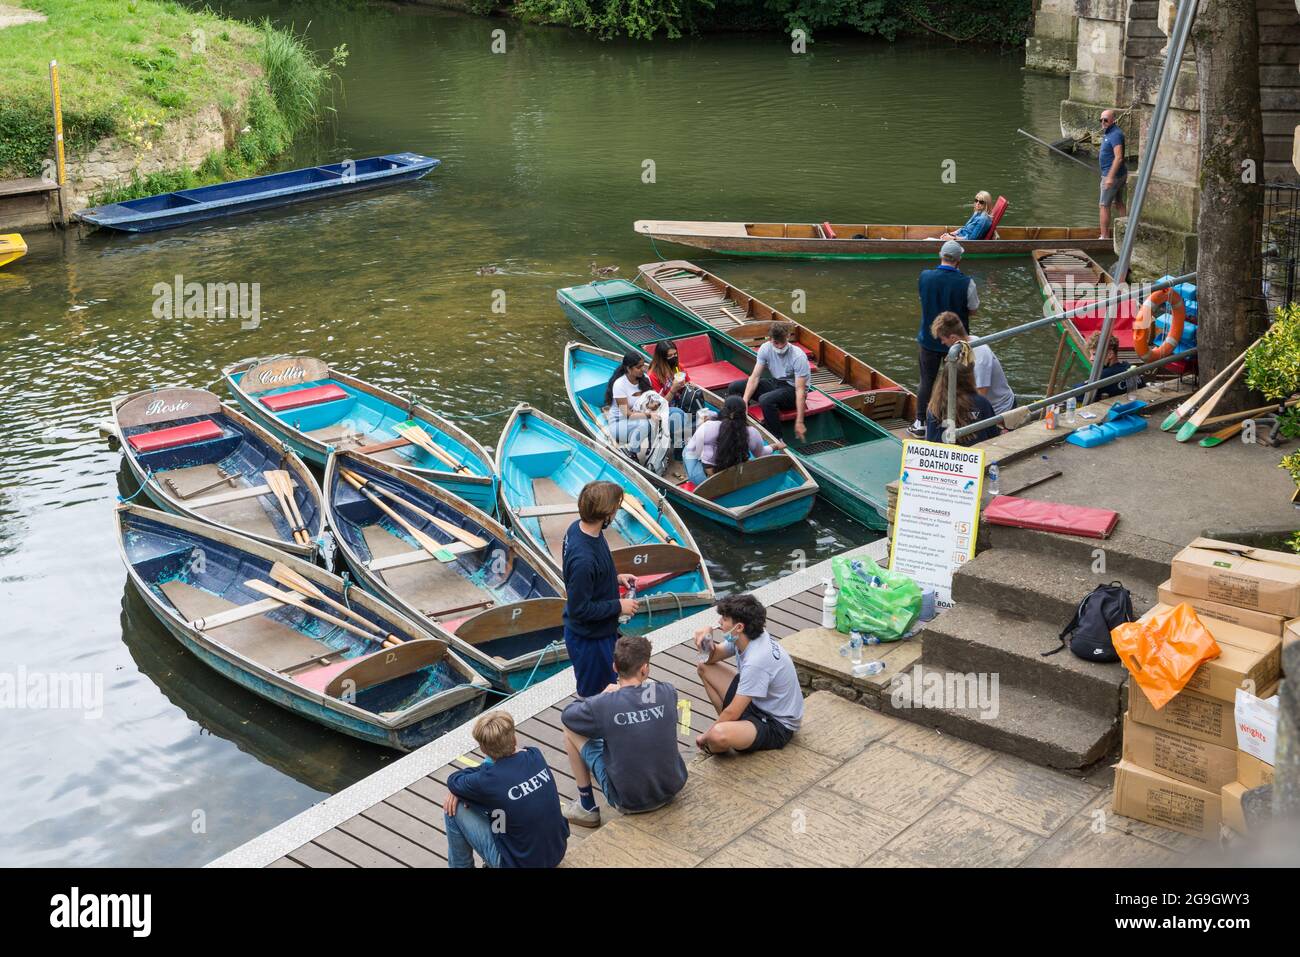 People hire small rowing boats and traditional punts at the Magdalen Bridge Boathouse on the River Cherwell, Oxford, England, UK Stock Photo